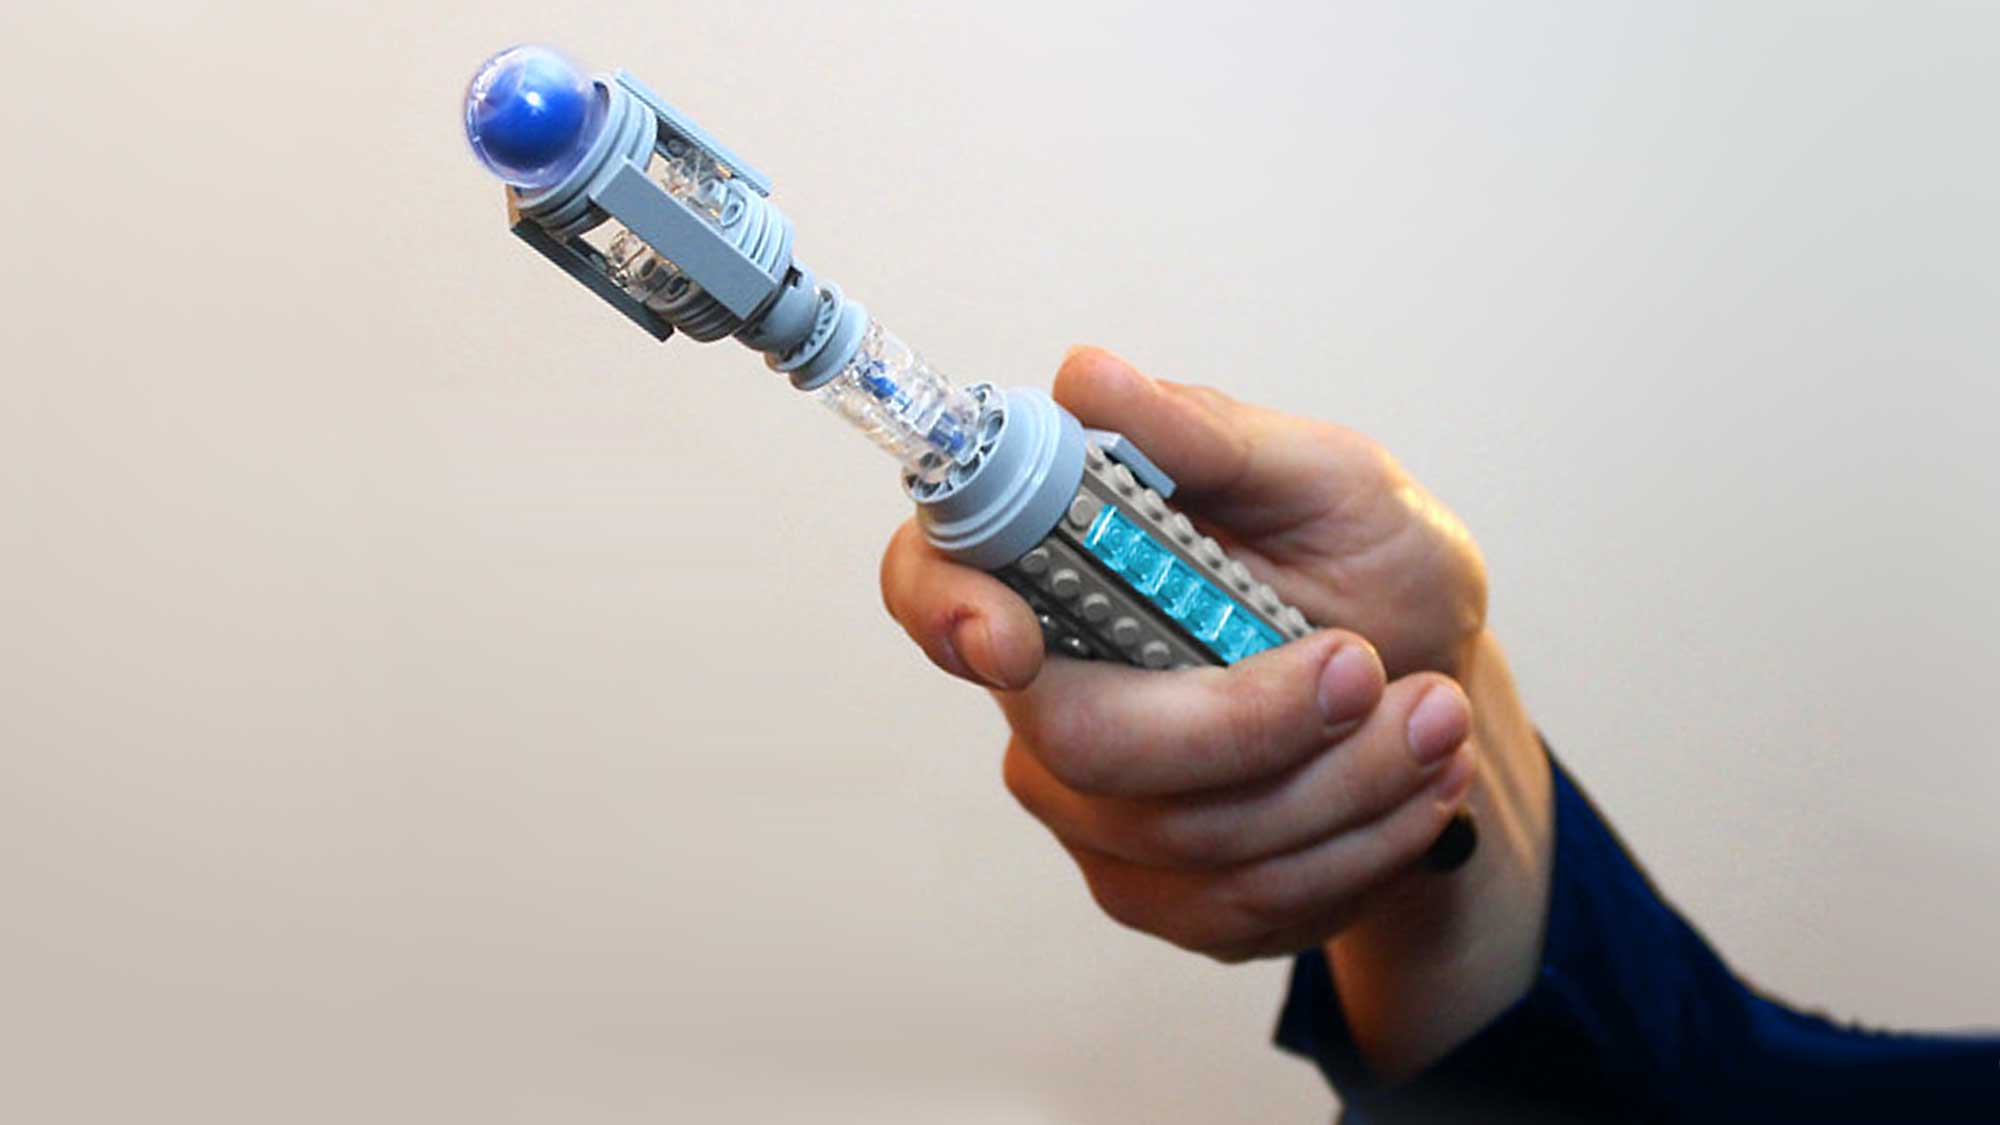 Have You Seen This Amazing LEGO Version Of Doctor Who's Sonic Screwdriver?